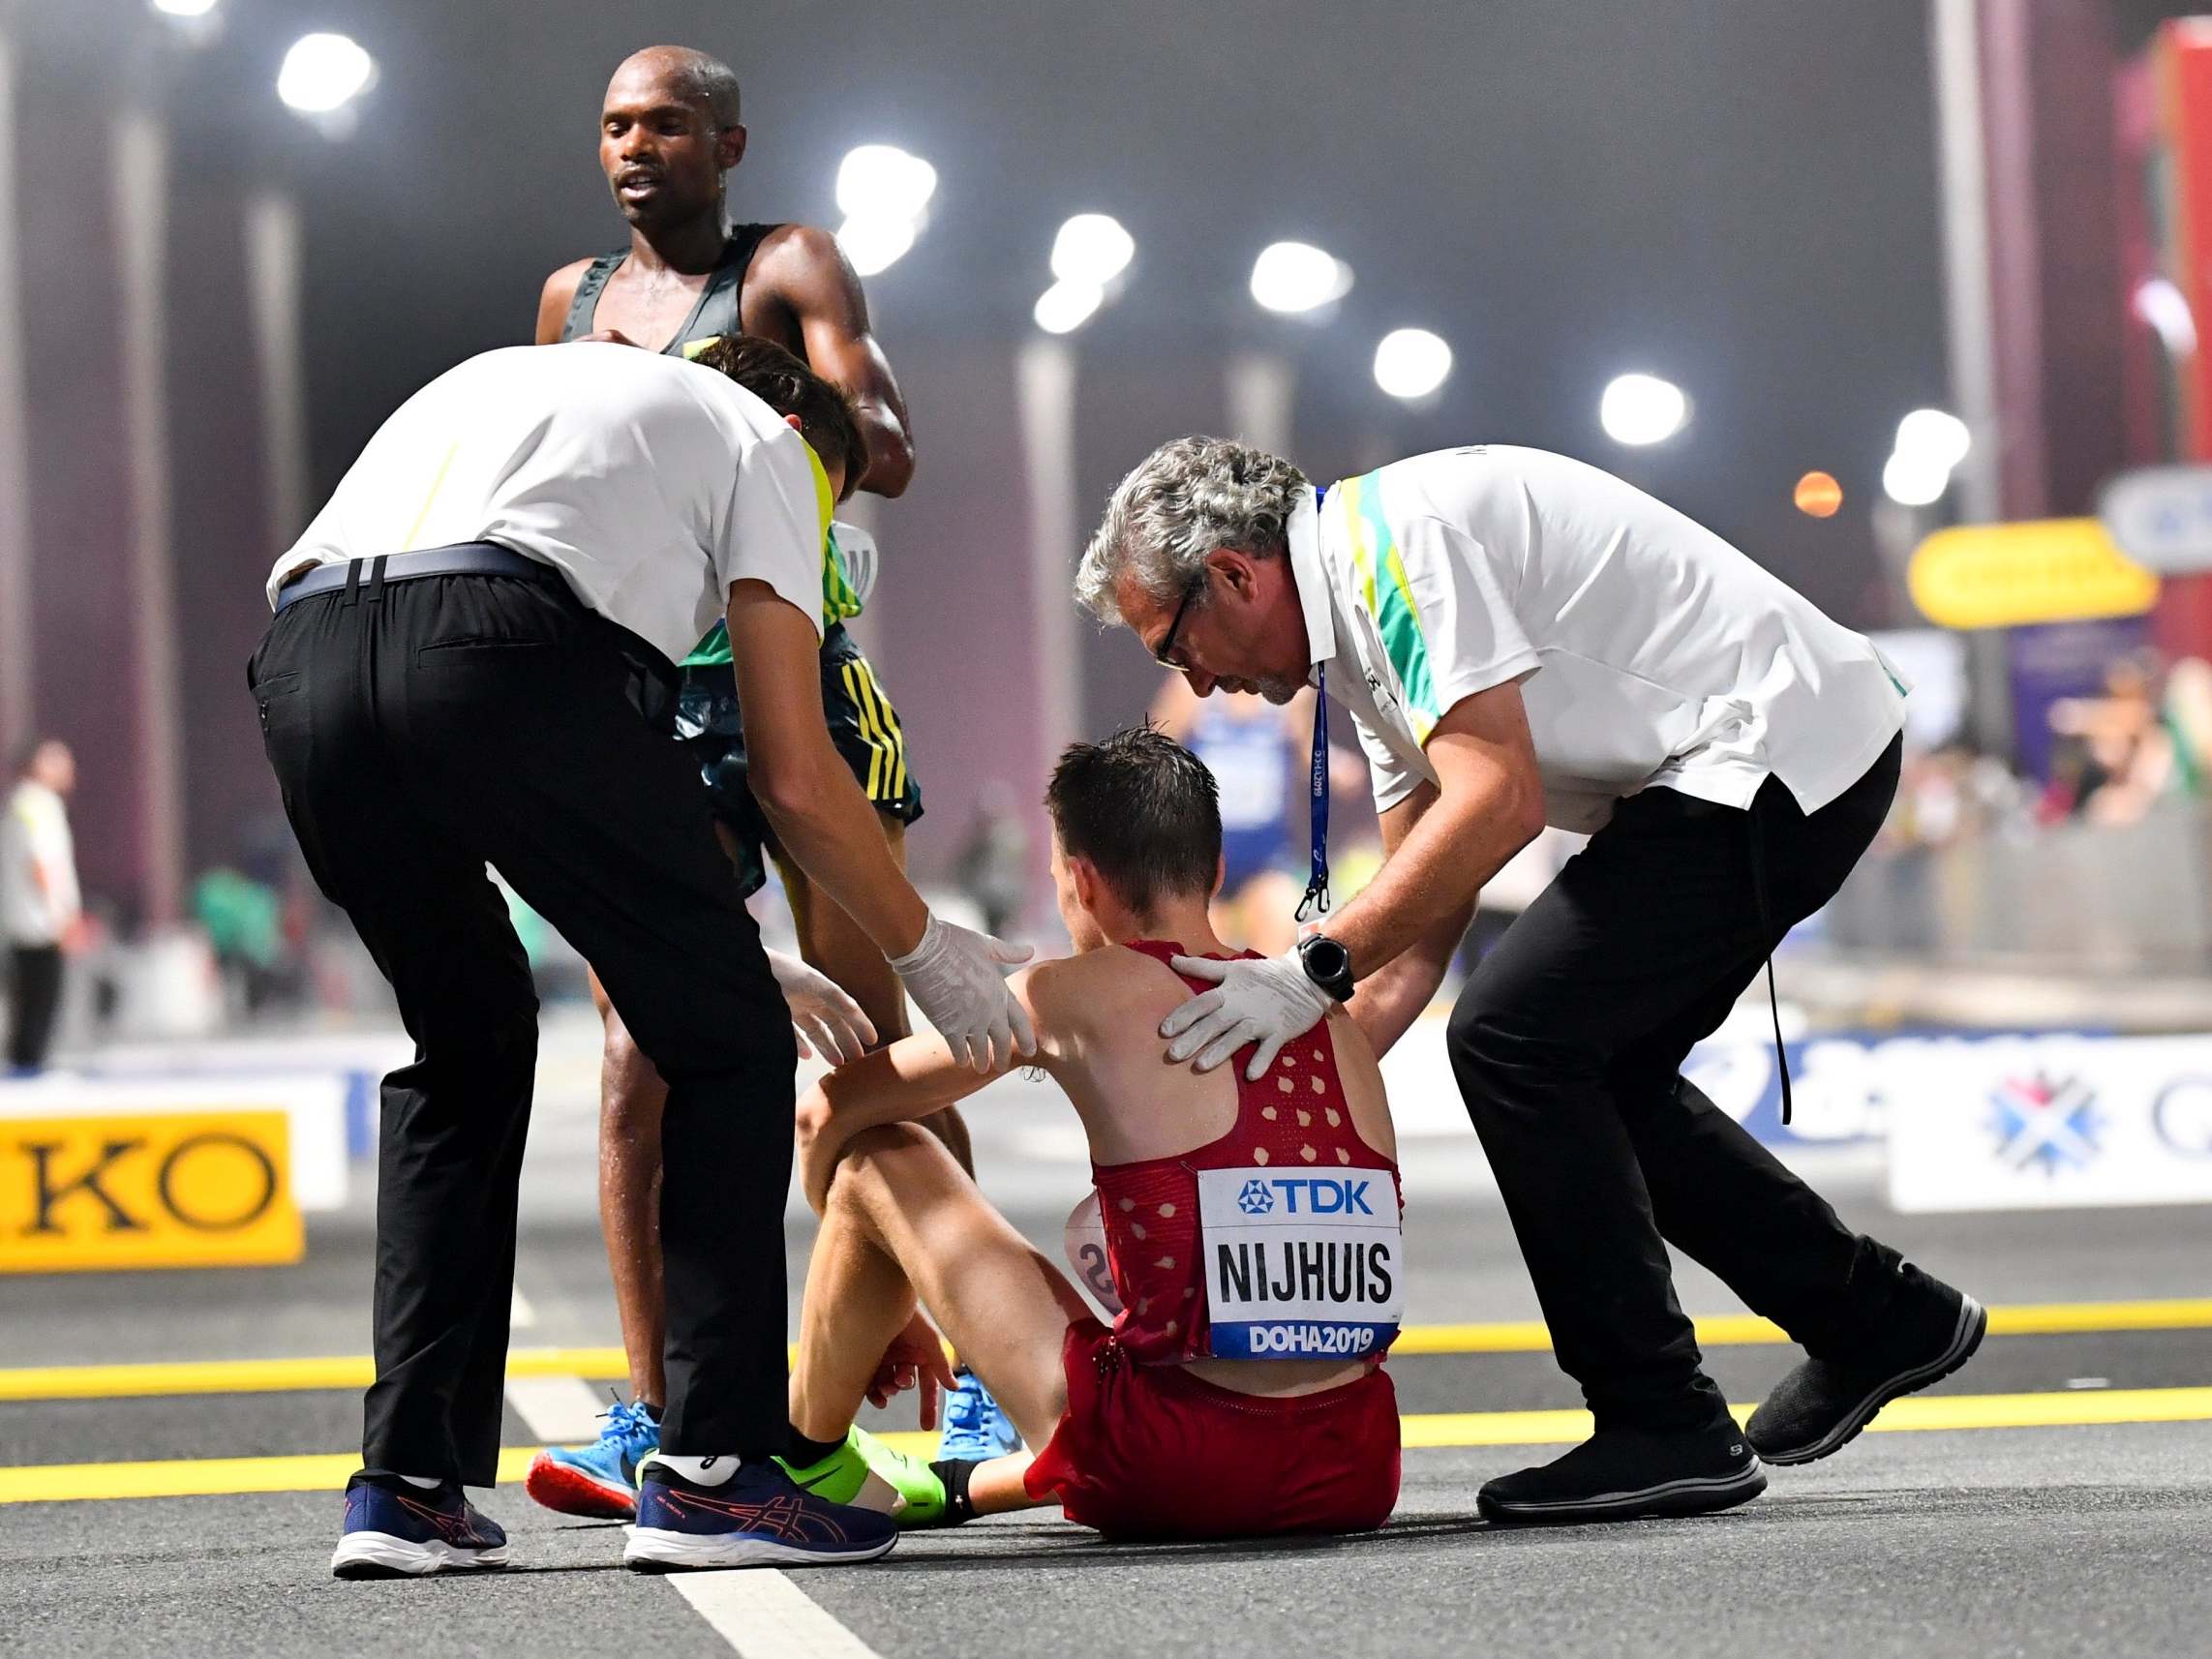 The World Championships marathon in Doha was held at midnight to combat the heat